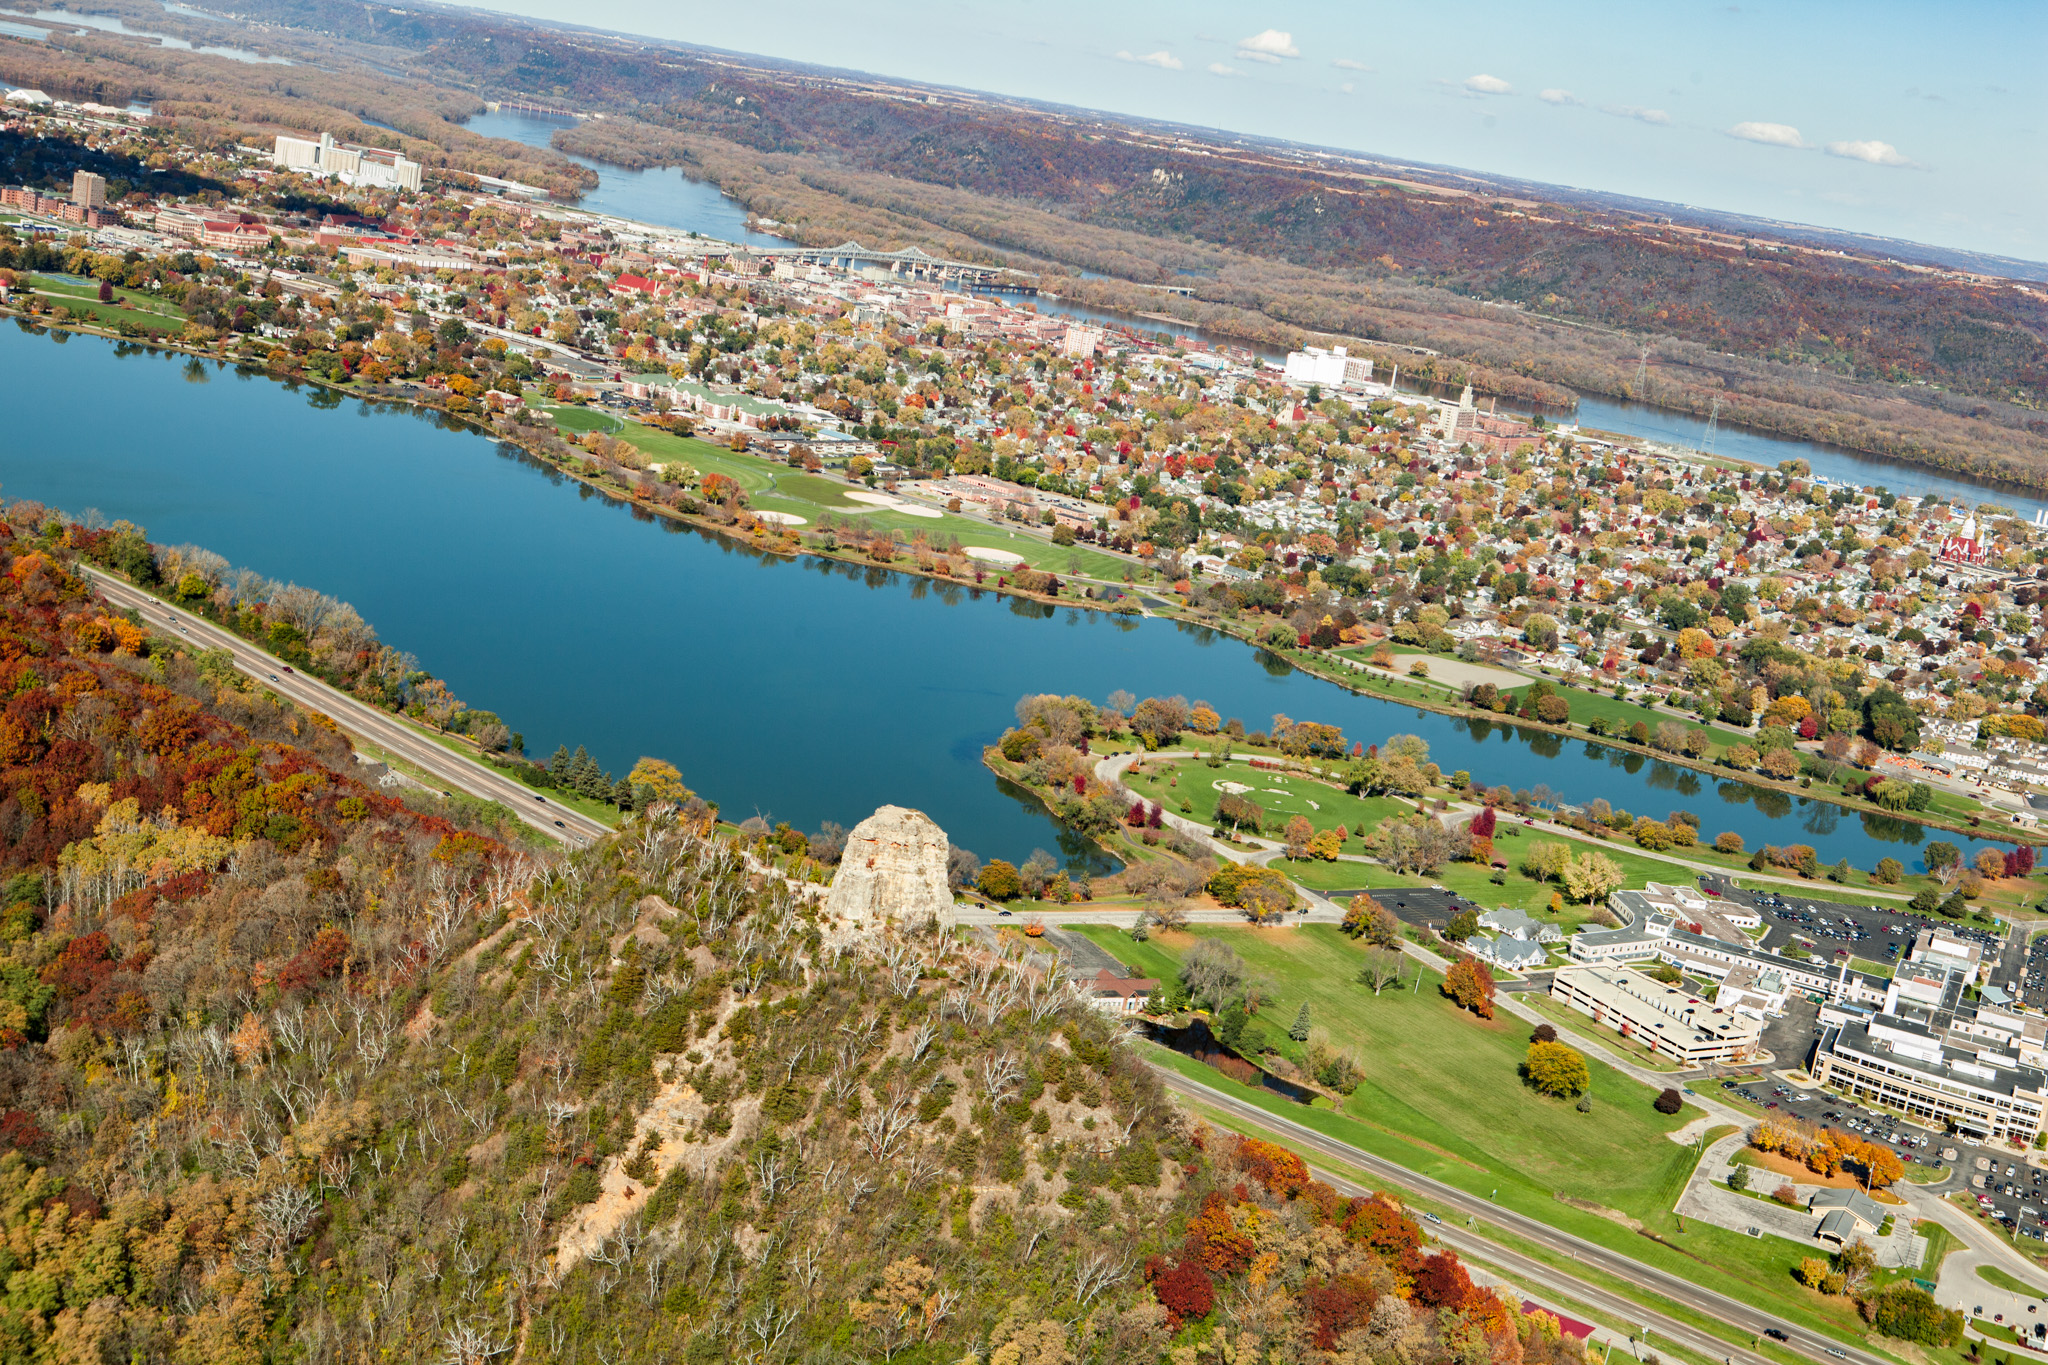 An aerial view of Winona shows Sugar Loaf rising high above the city